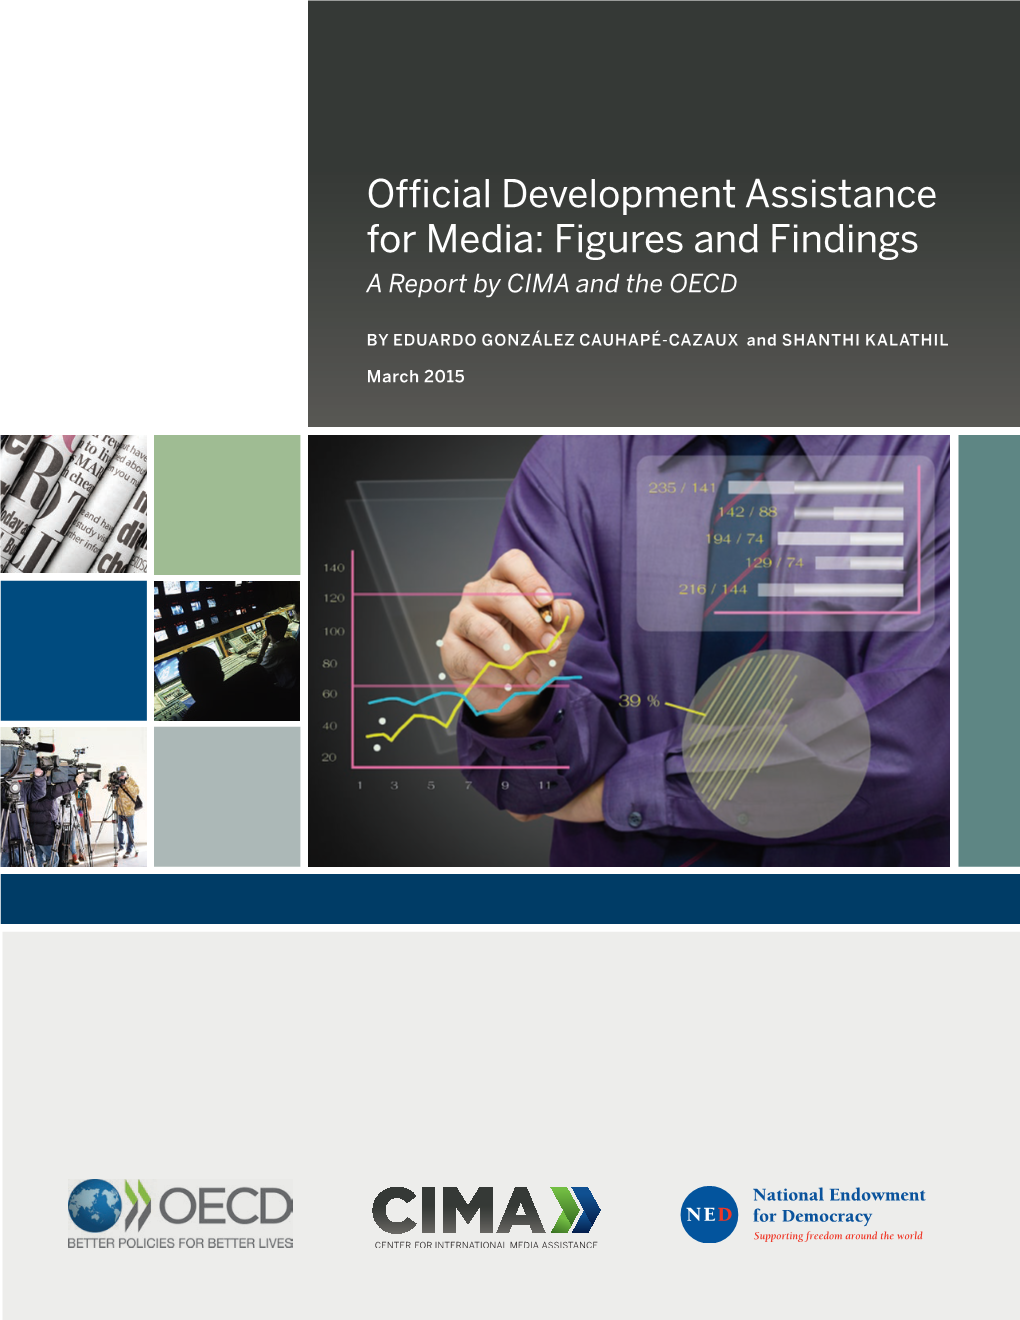 Official Development Assistance for Media: Figures and Findings a Report by CIMA and the OECD